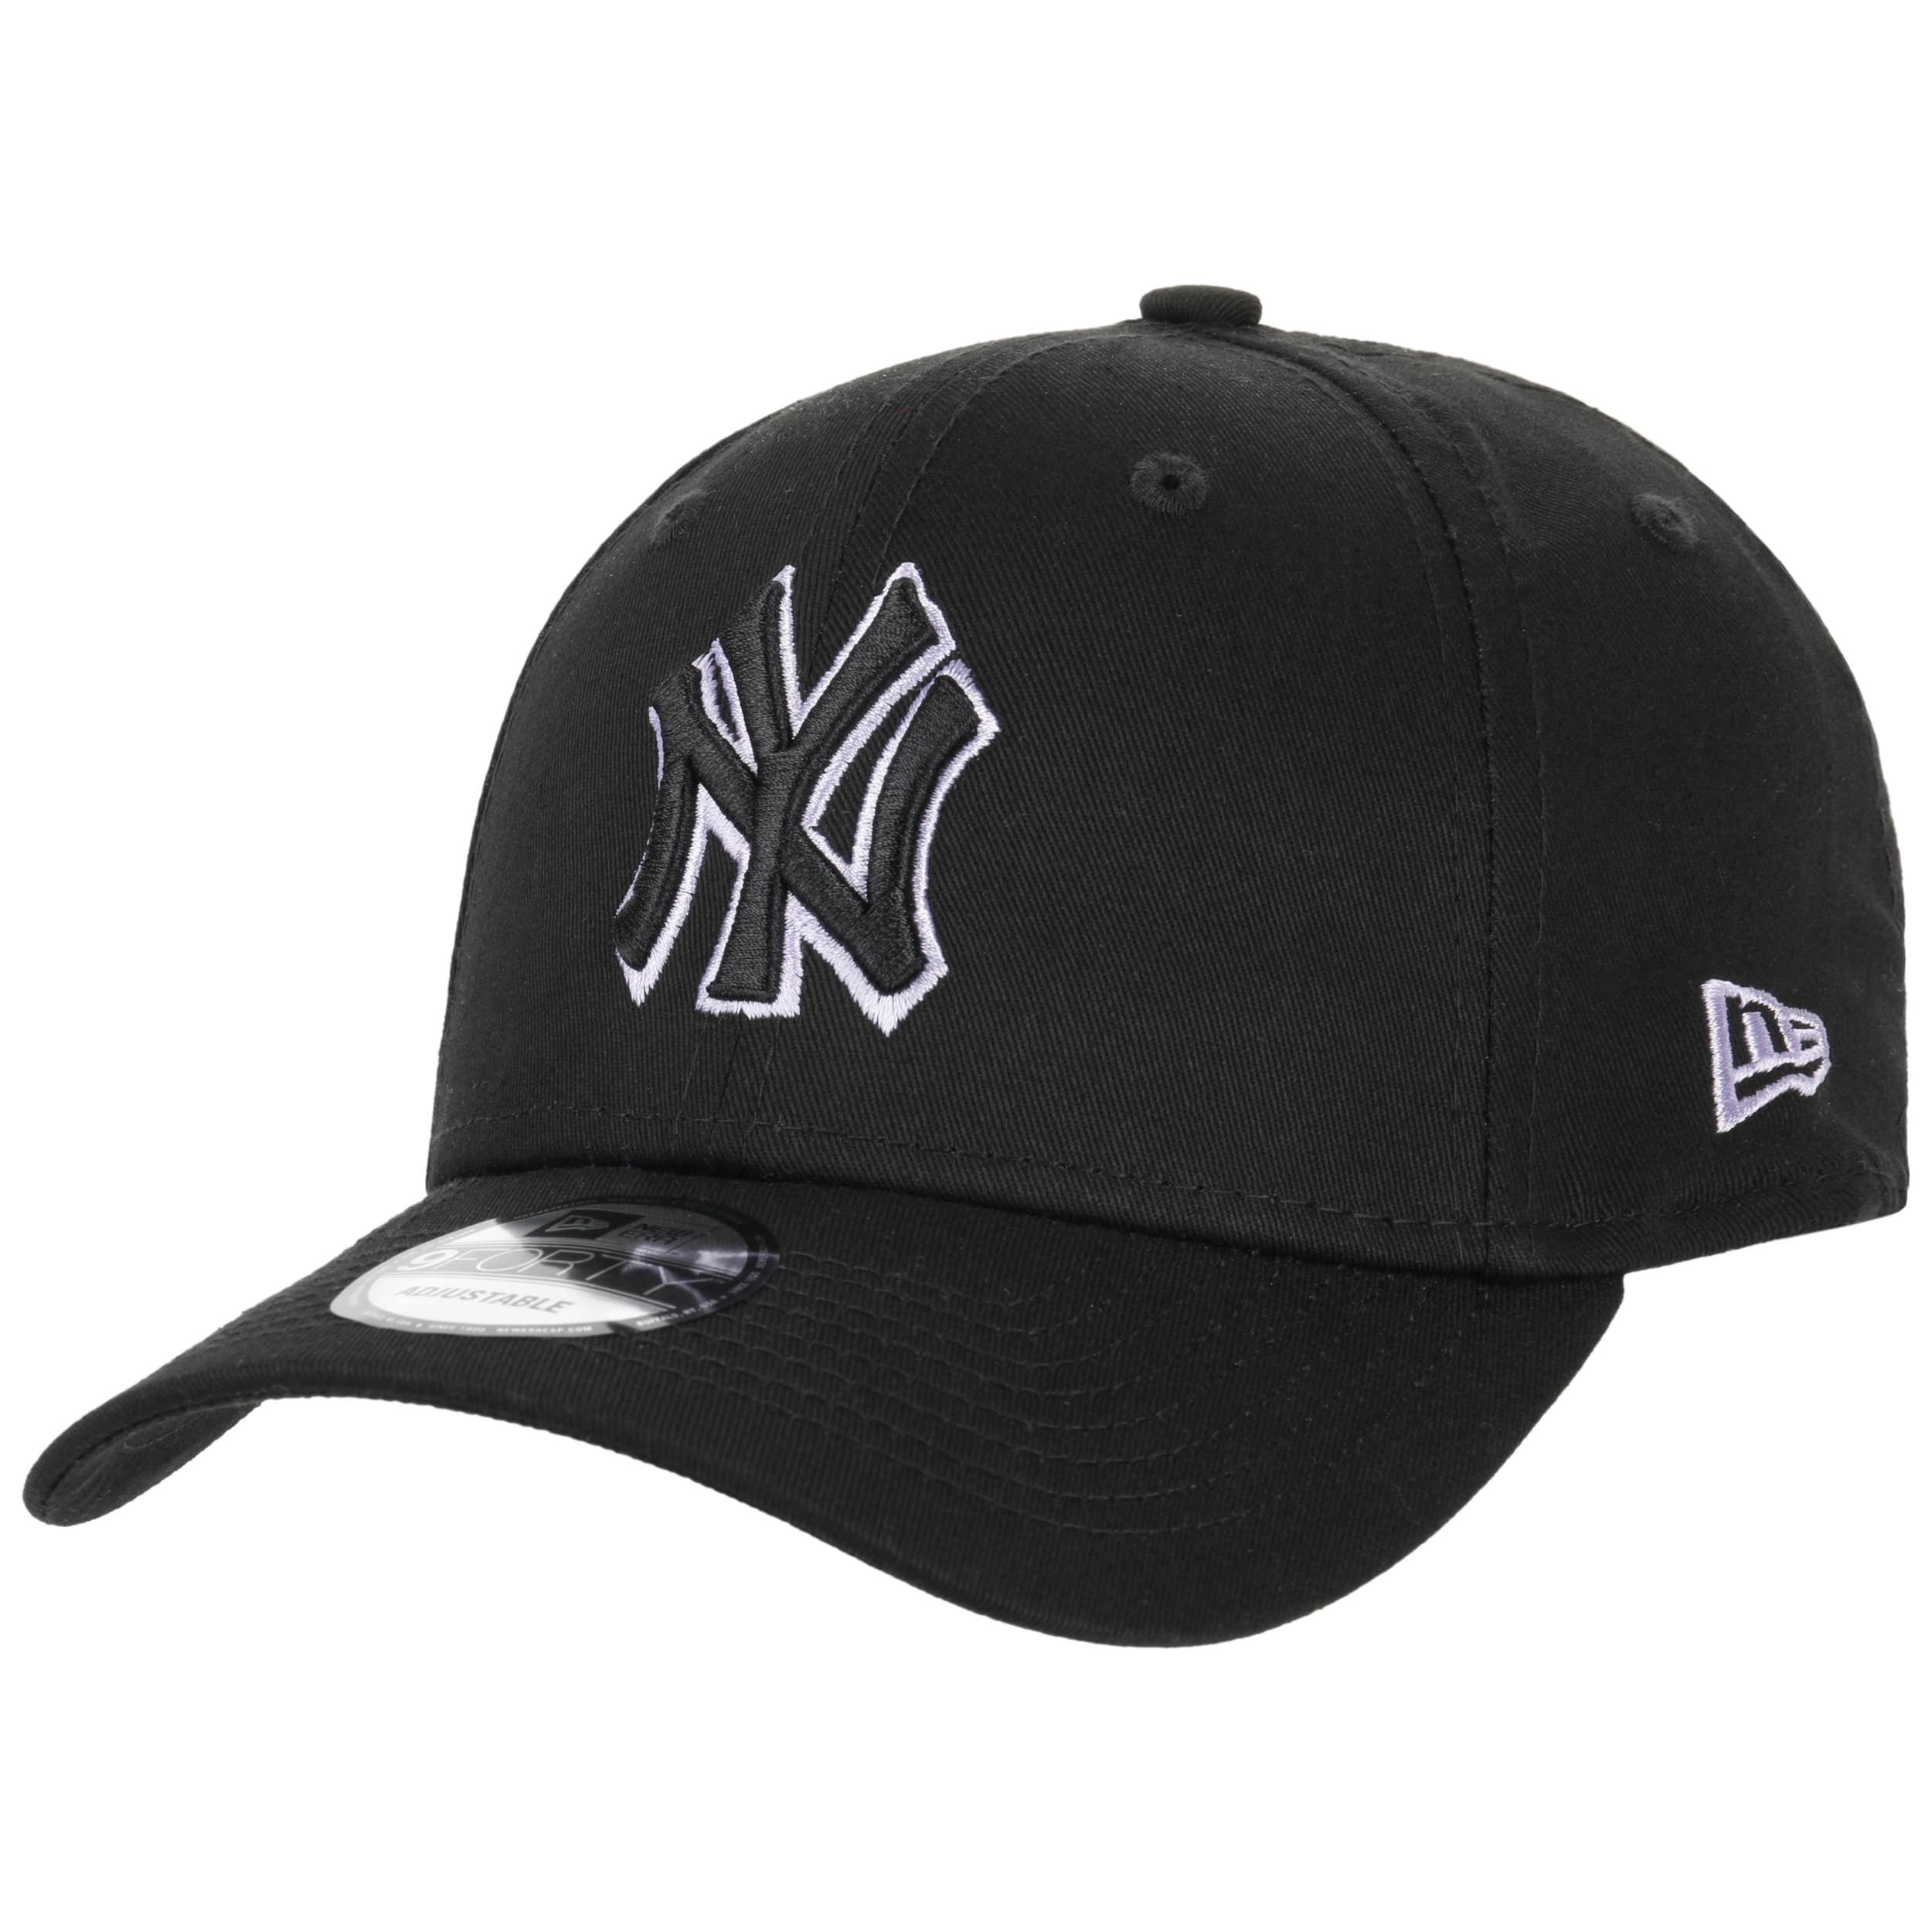 New 26,95 by € Yankees 9Forty Era Team Cap Outline -